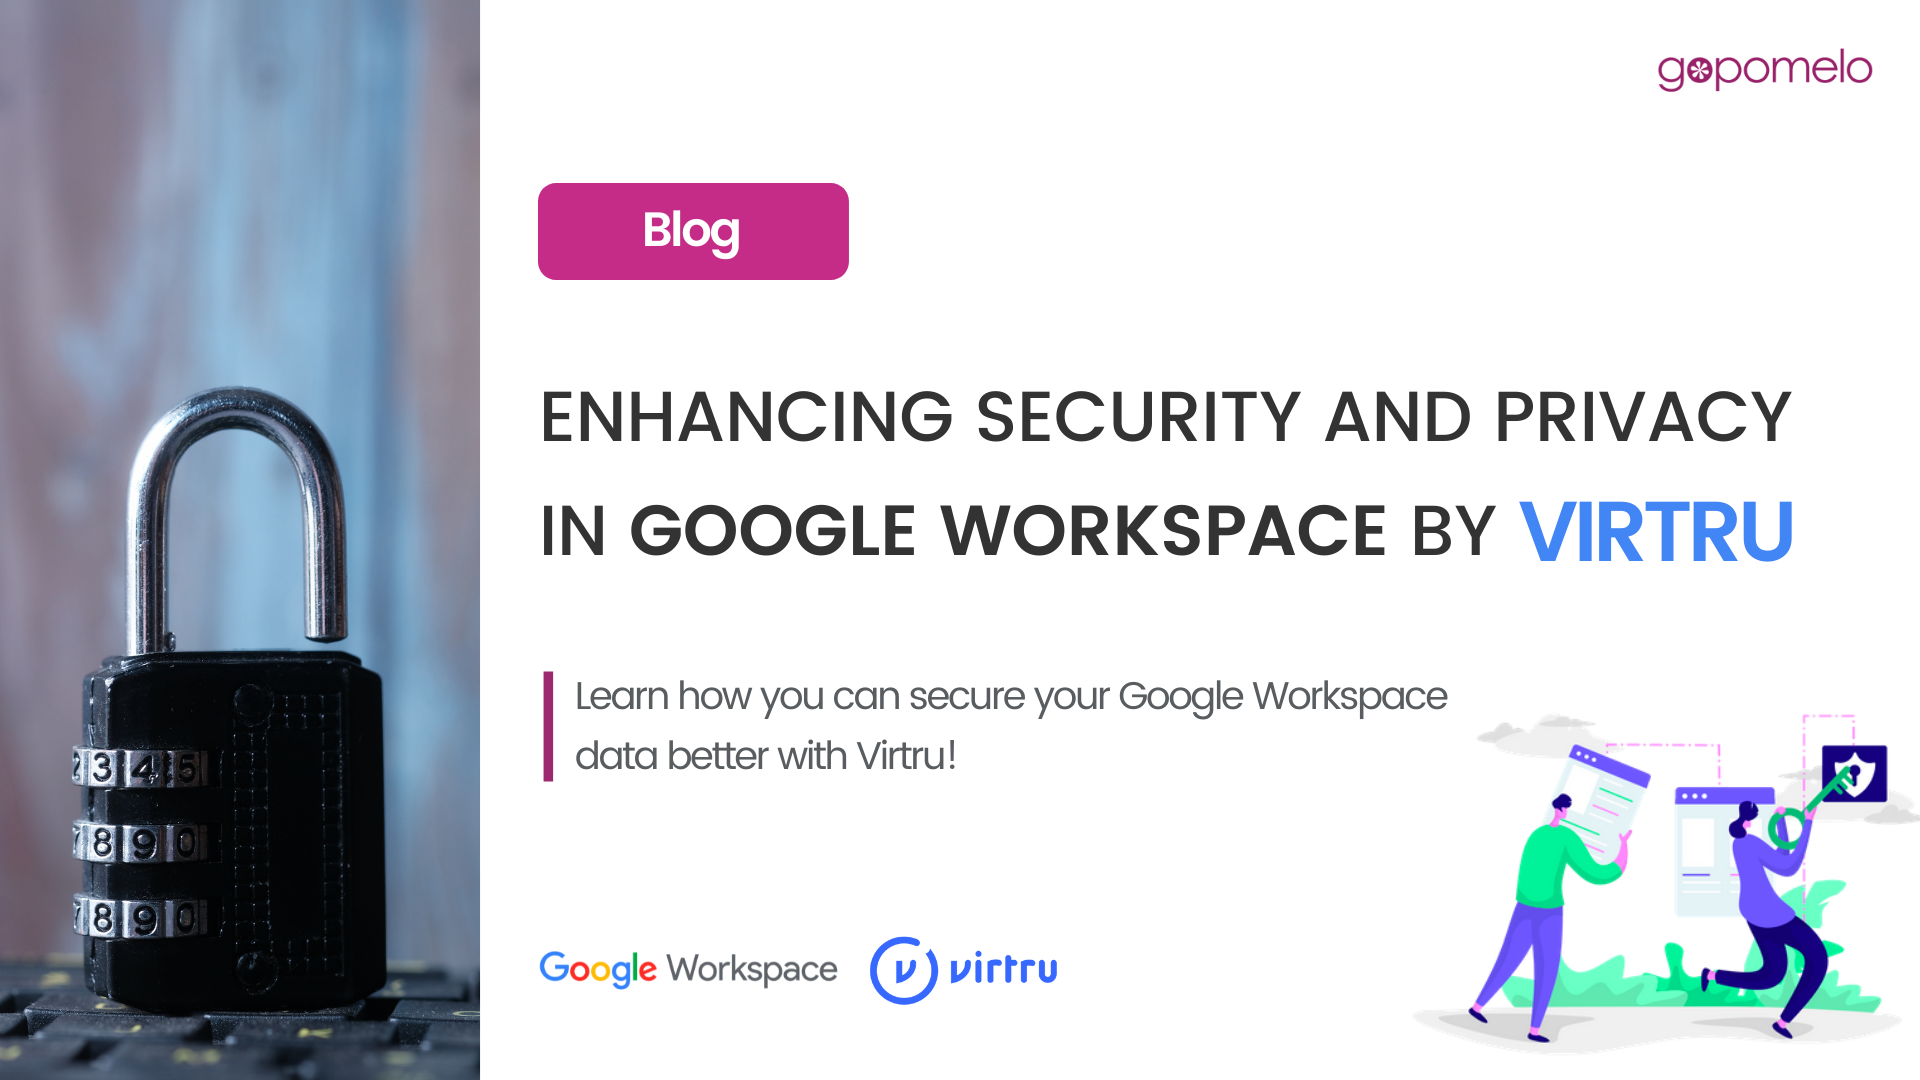 Enhancing security and privacy in Google Workspace by Virtru